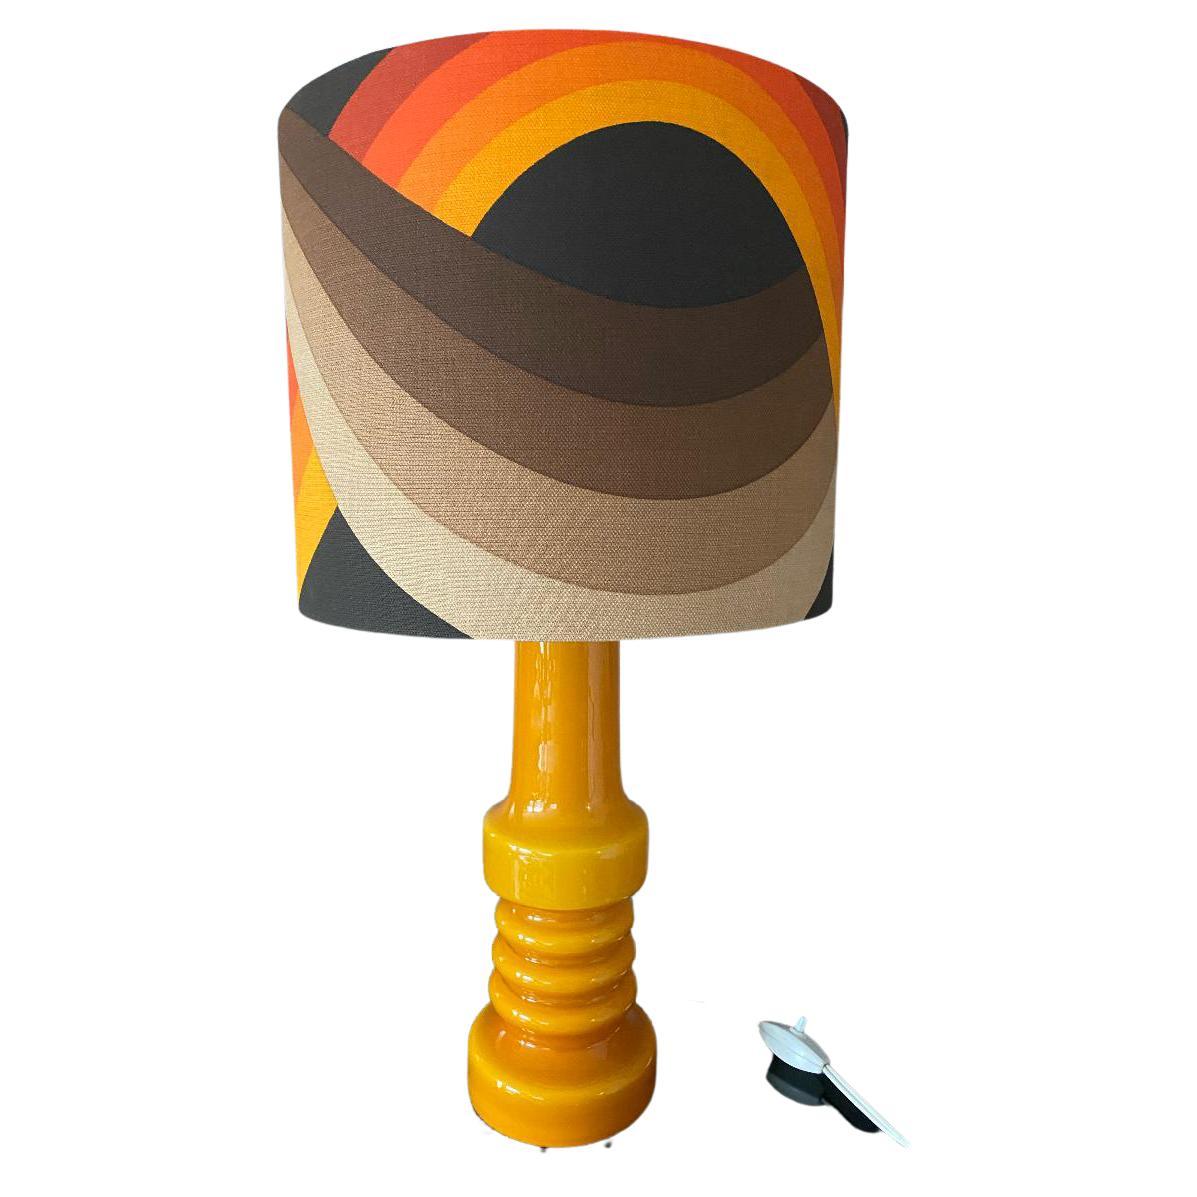 Vibrant lamp of the renown Holmegaard glass factory located in Fensmark, Denmark. The company was founded 1823.
This lamp is in a fairly good condition, and has a lampshade newly made with a 1970s fabric.

Measures: Lamp is 38cm high, including